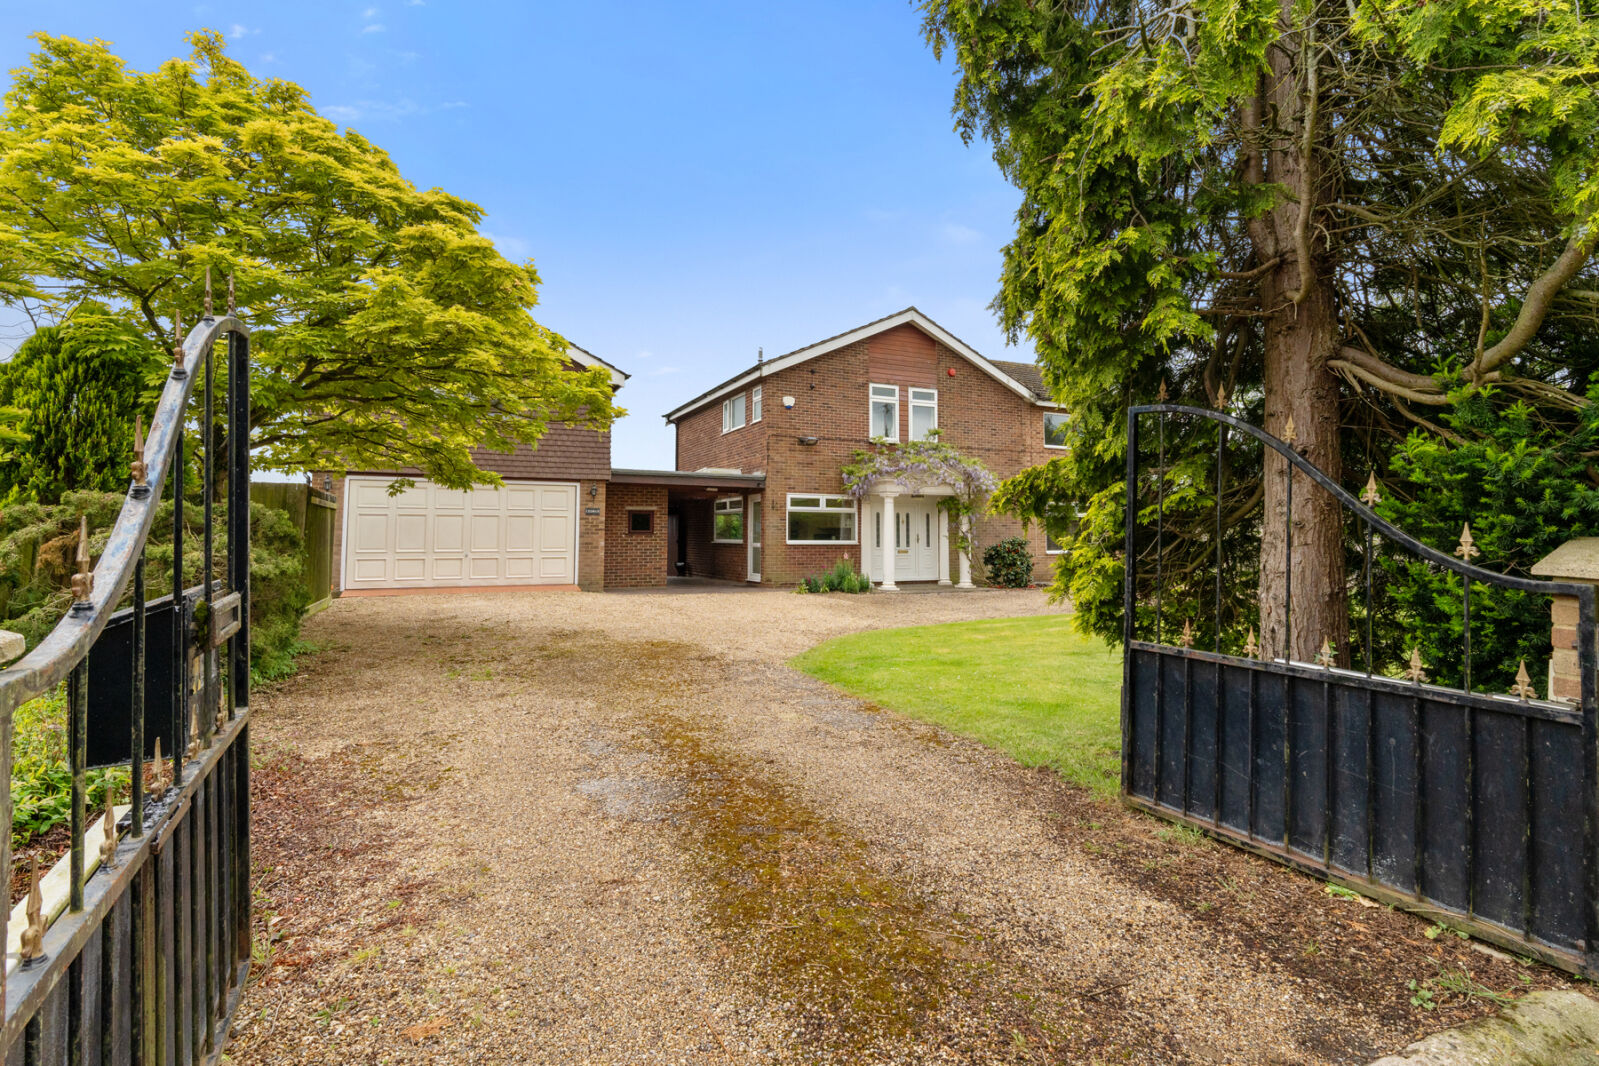 5 bedroom detached house for sale Burton End, Stansted, CM24, main image